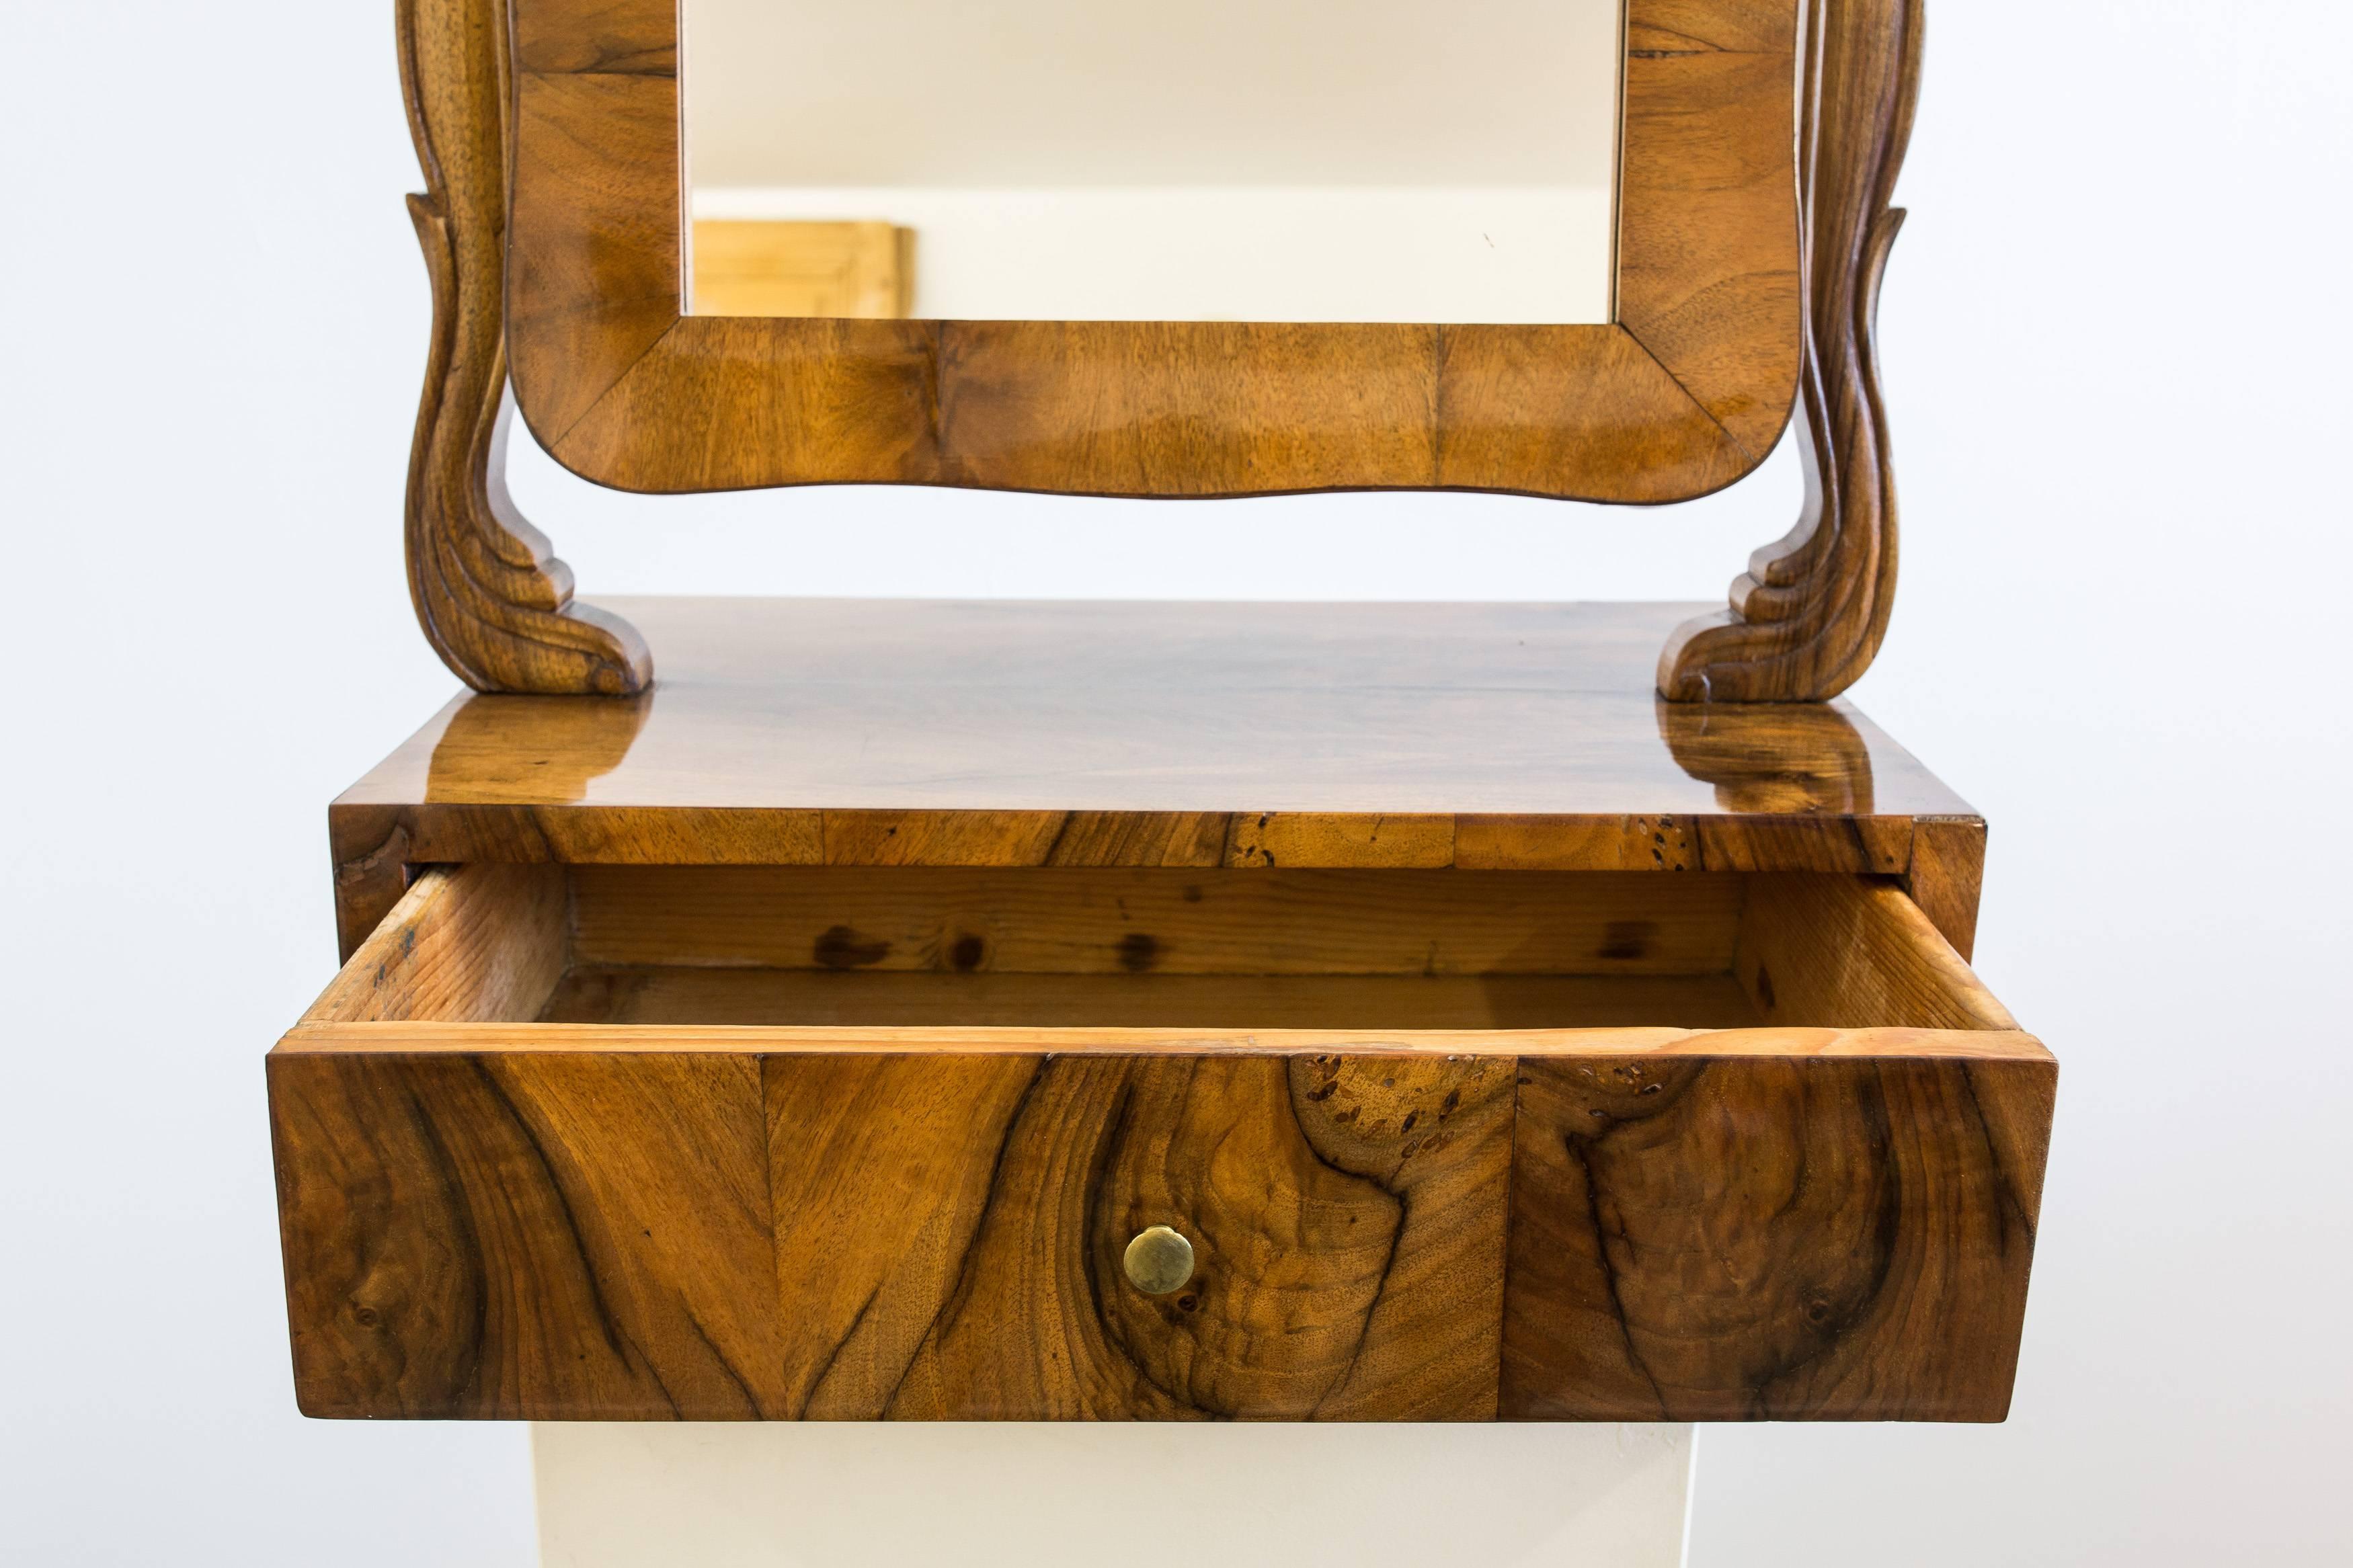 Decorative vanity mirror or box from the Czech Republic circa 1840, walnut veneered with a hand-polished shellac finish. The mirror, floating between two carved (fan decored) pillars was renewed during the restoration process and can be vertically